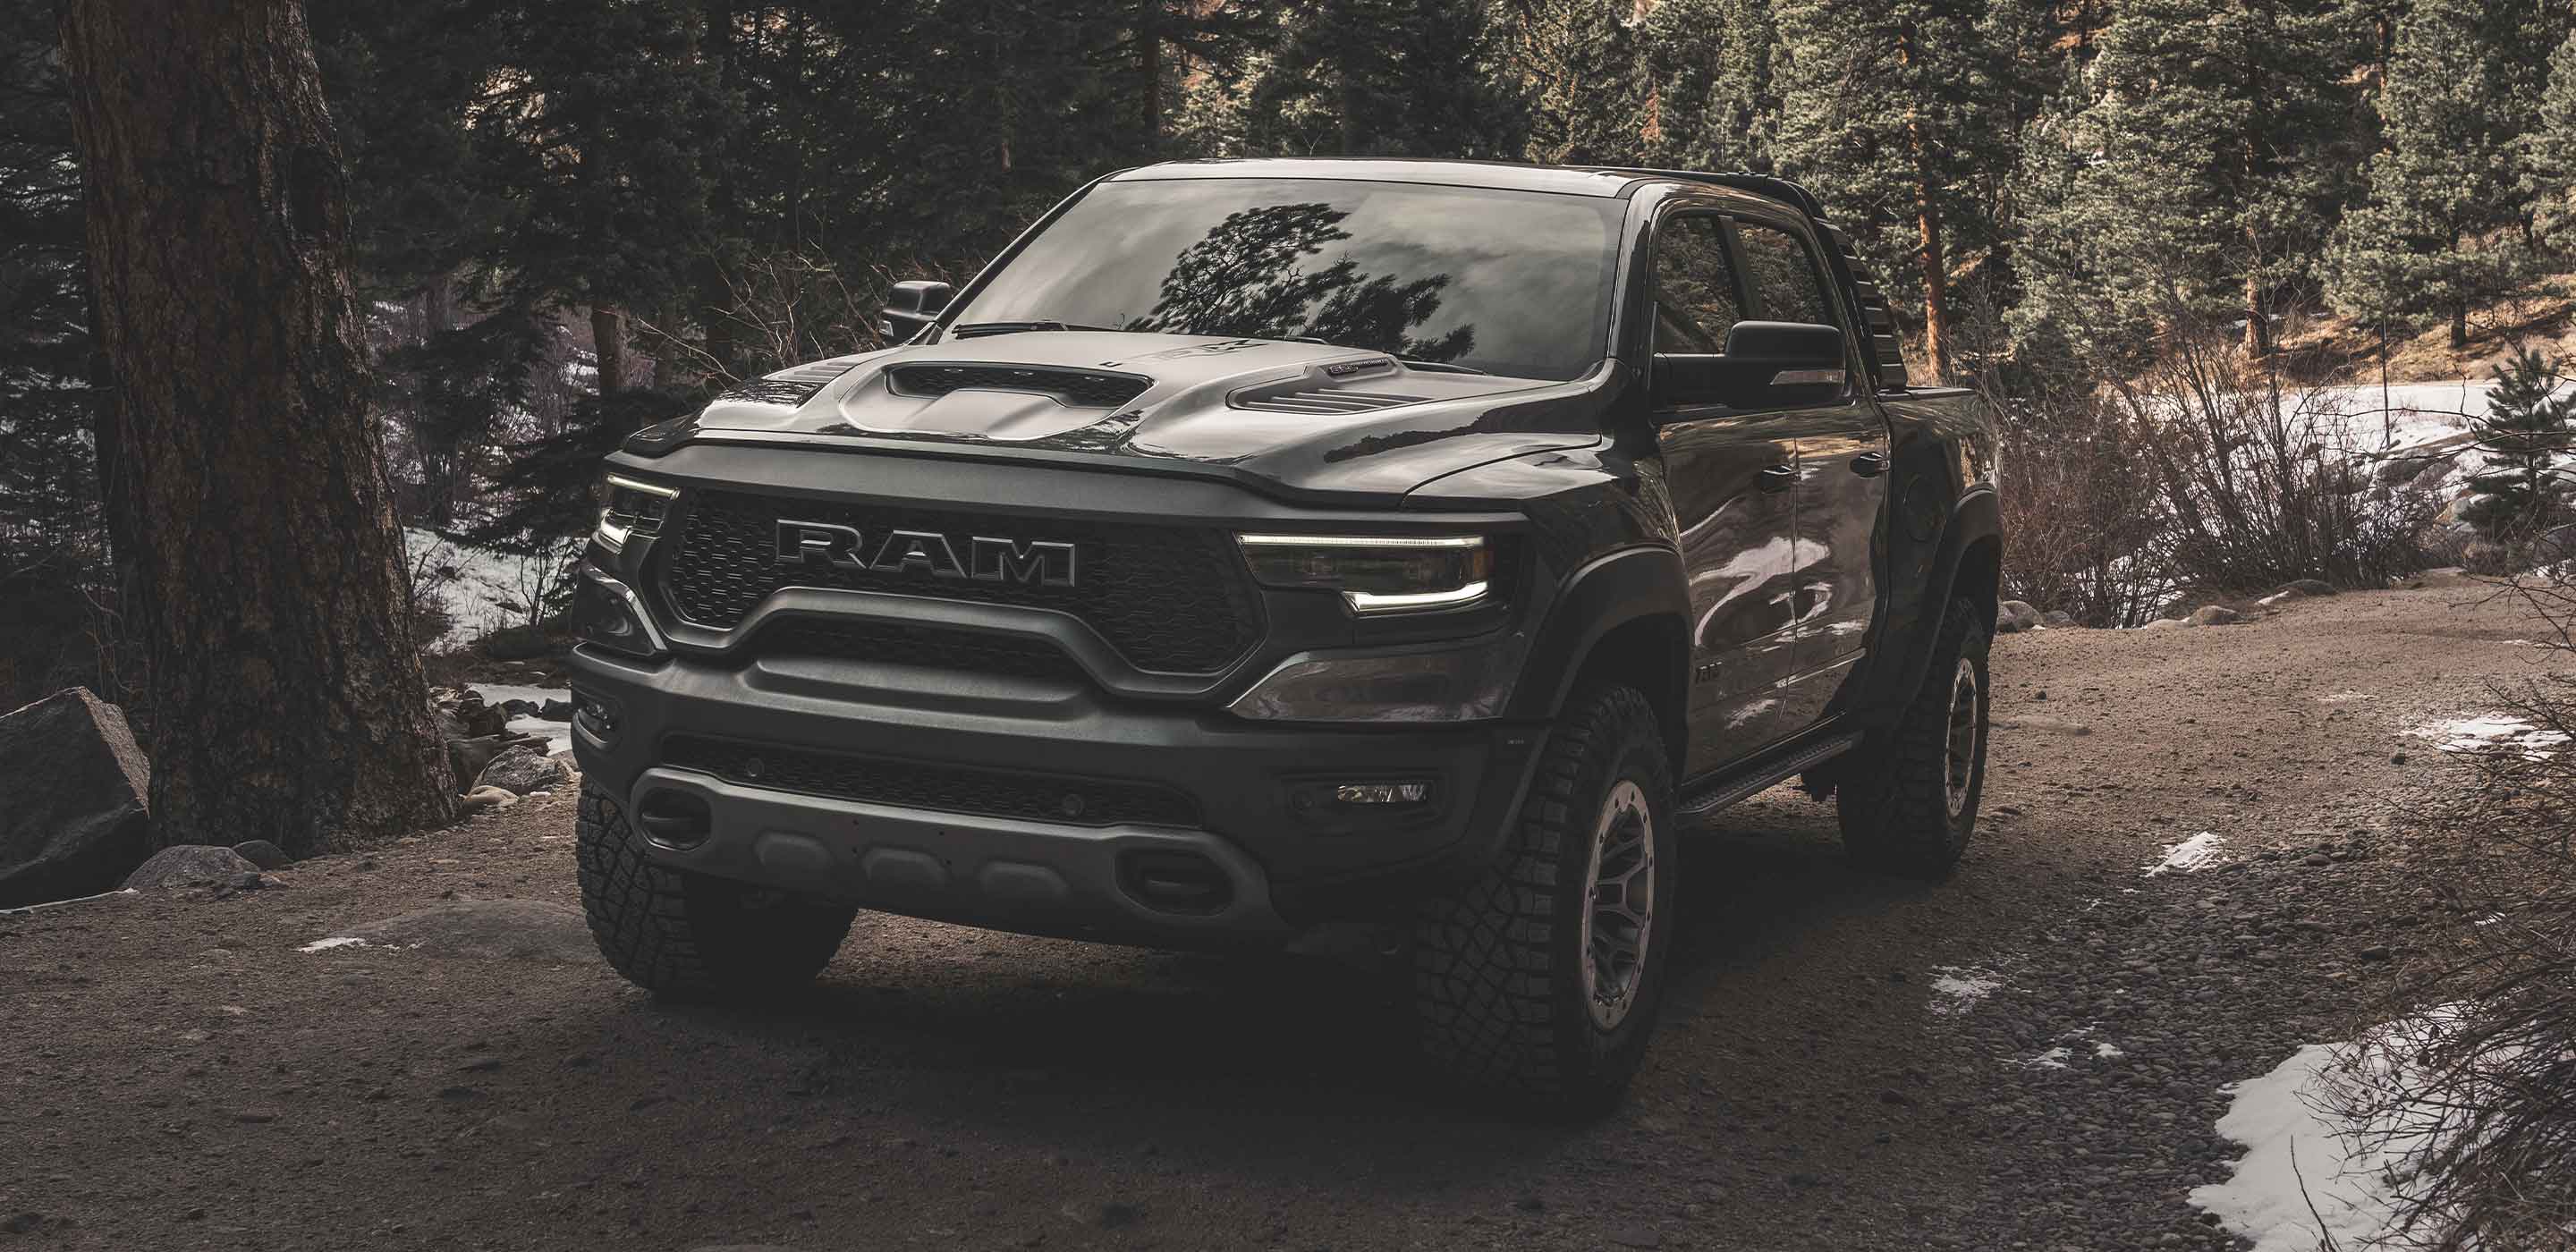 2022 Ram 1500 TRX Gallery. Off Road Truck Picture